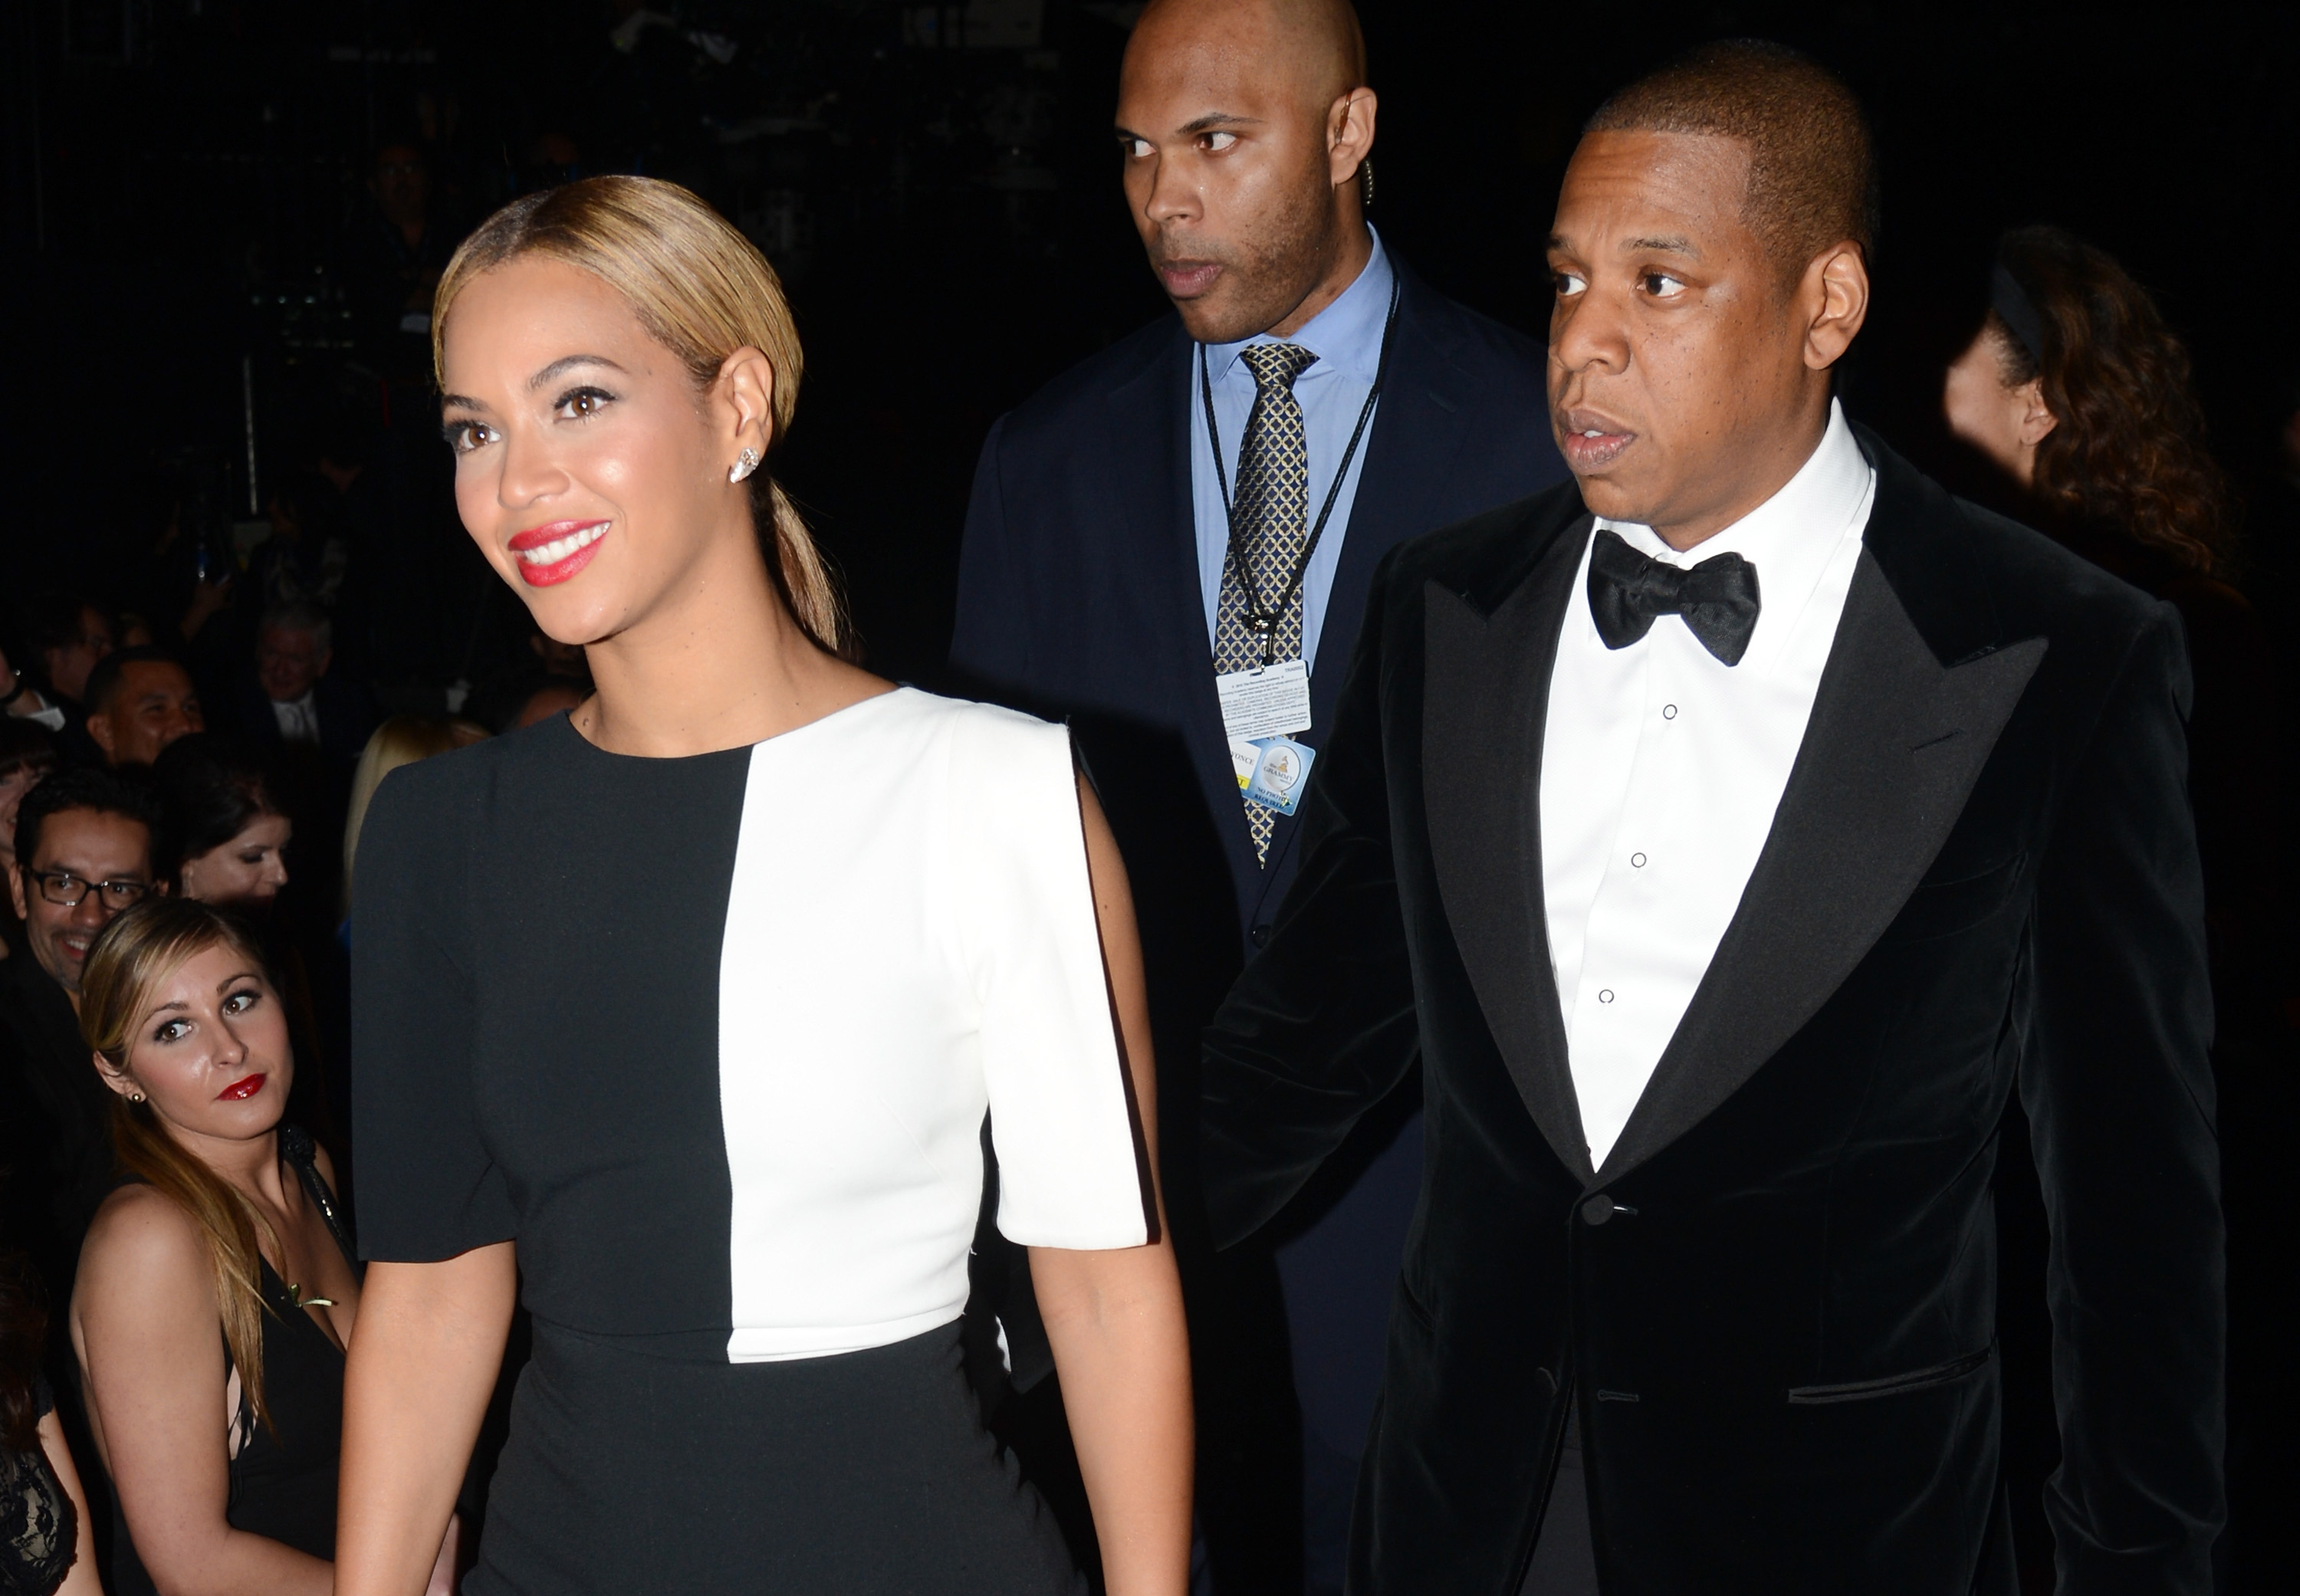 Beyonce and Jay-Z attend the 55th Annual GRAMMY Awards at [f500link]Staples[/f500link] Center on February 10, 2013 in Los Angeles, California. (Photo by Jeff Kravitz/FilmMagic) (Jeff Kravitz—FilmMagic)